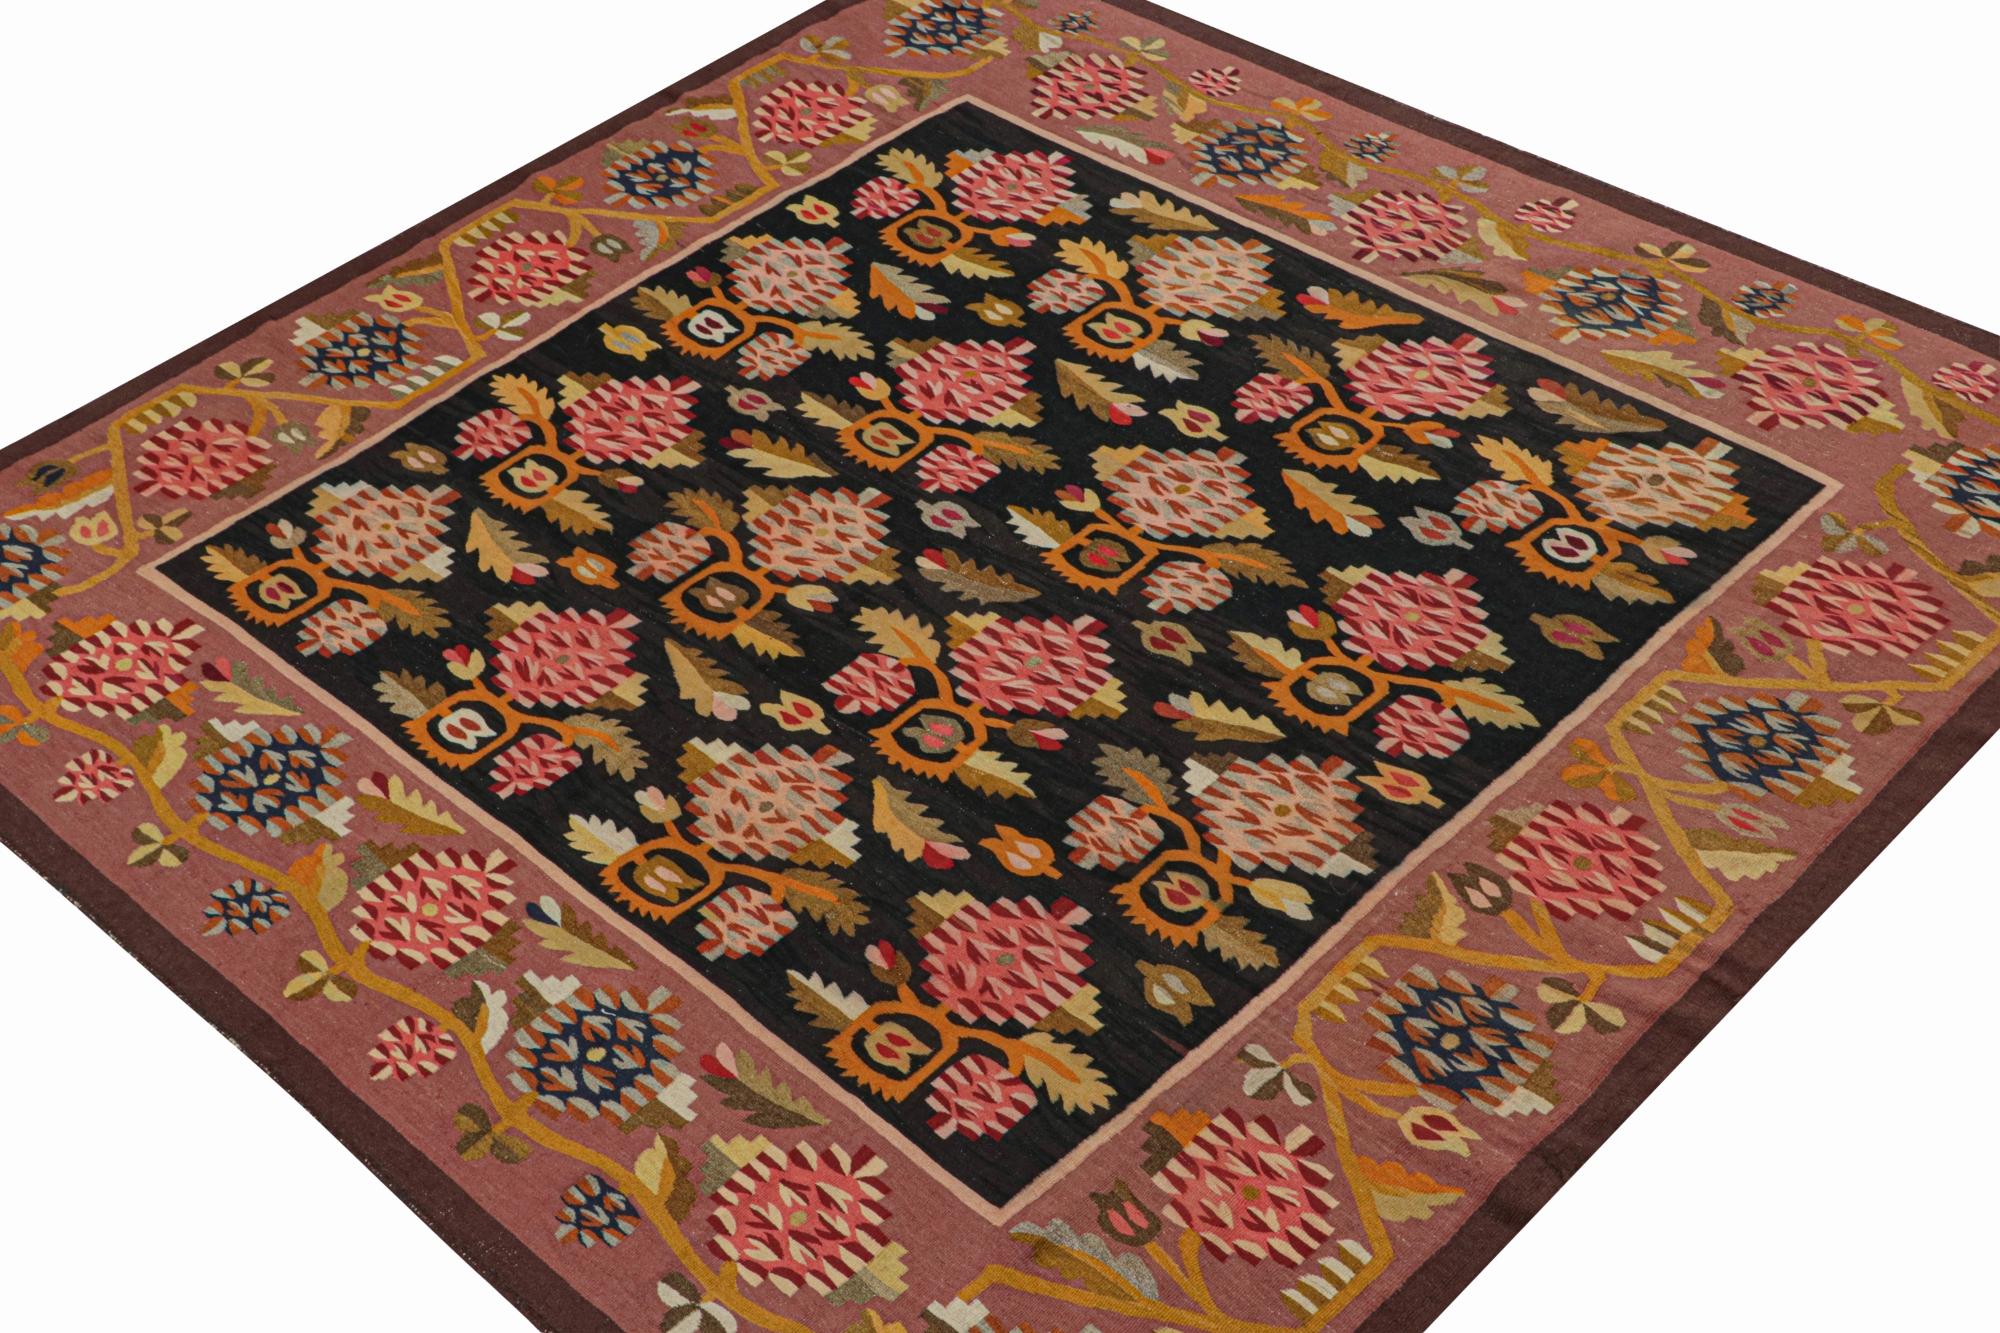 Turkish Antique Bessarabian Kilim in Black & Pink with Floral Patterns, from Rug & Kilim For Sale